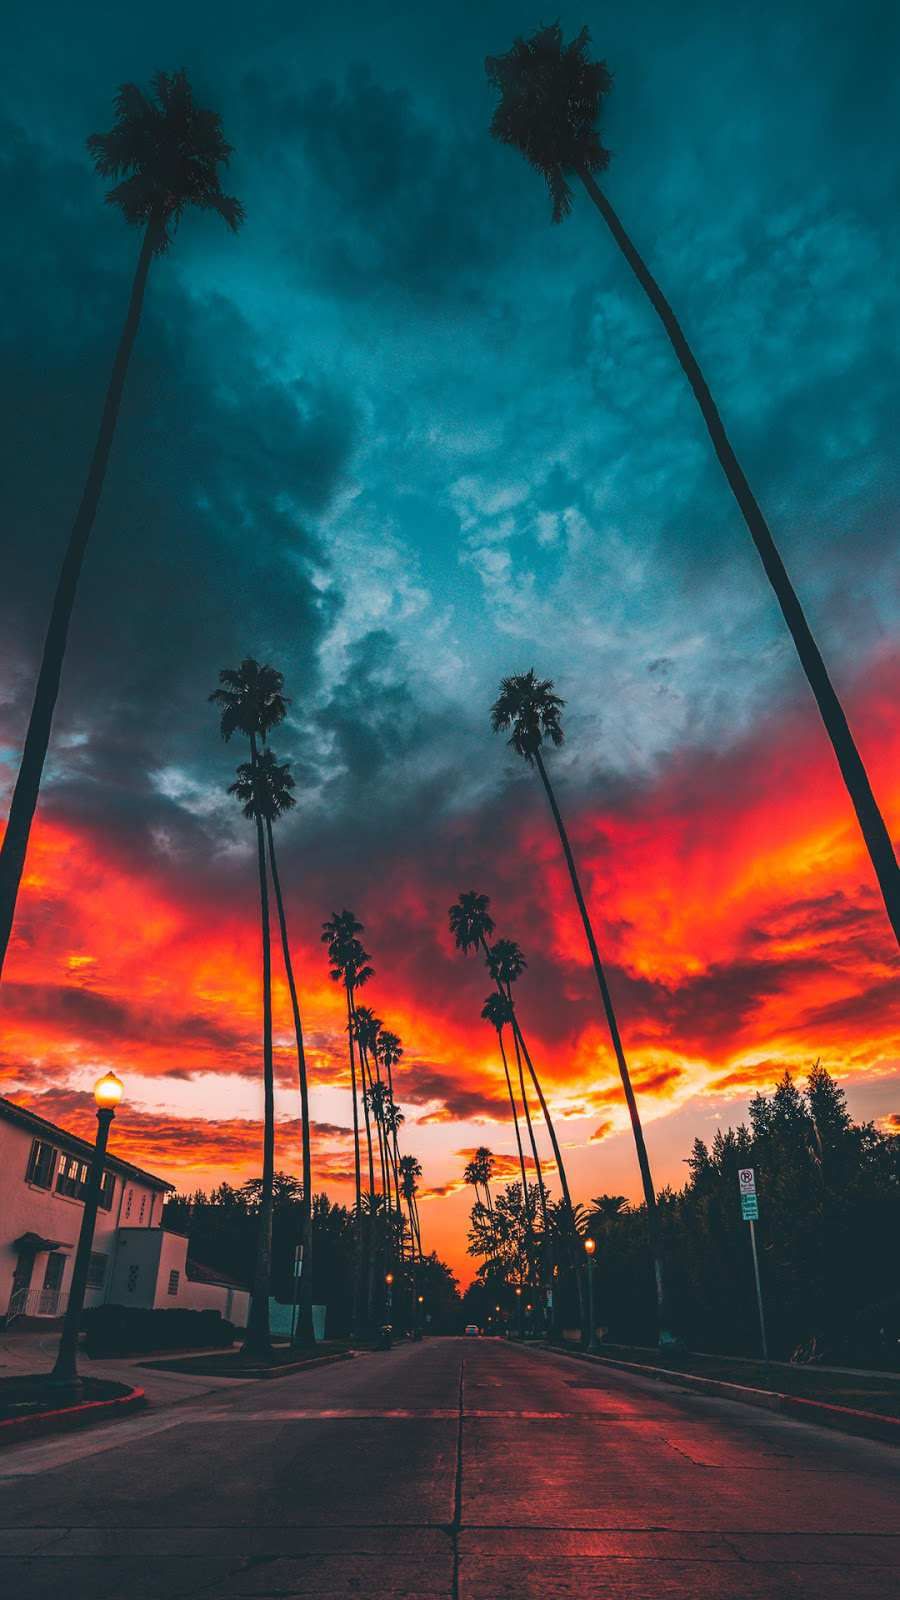 10 Best For Aesthetic Sunset Wallpaper Iphone Xr Awakening Stars Search your top hd images for your phone, desktop or website. aesthetic sunset wallpaper iphone xr